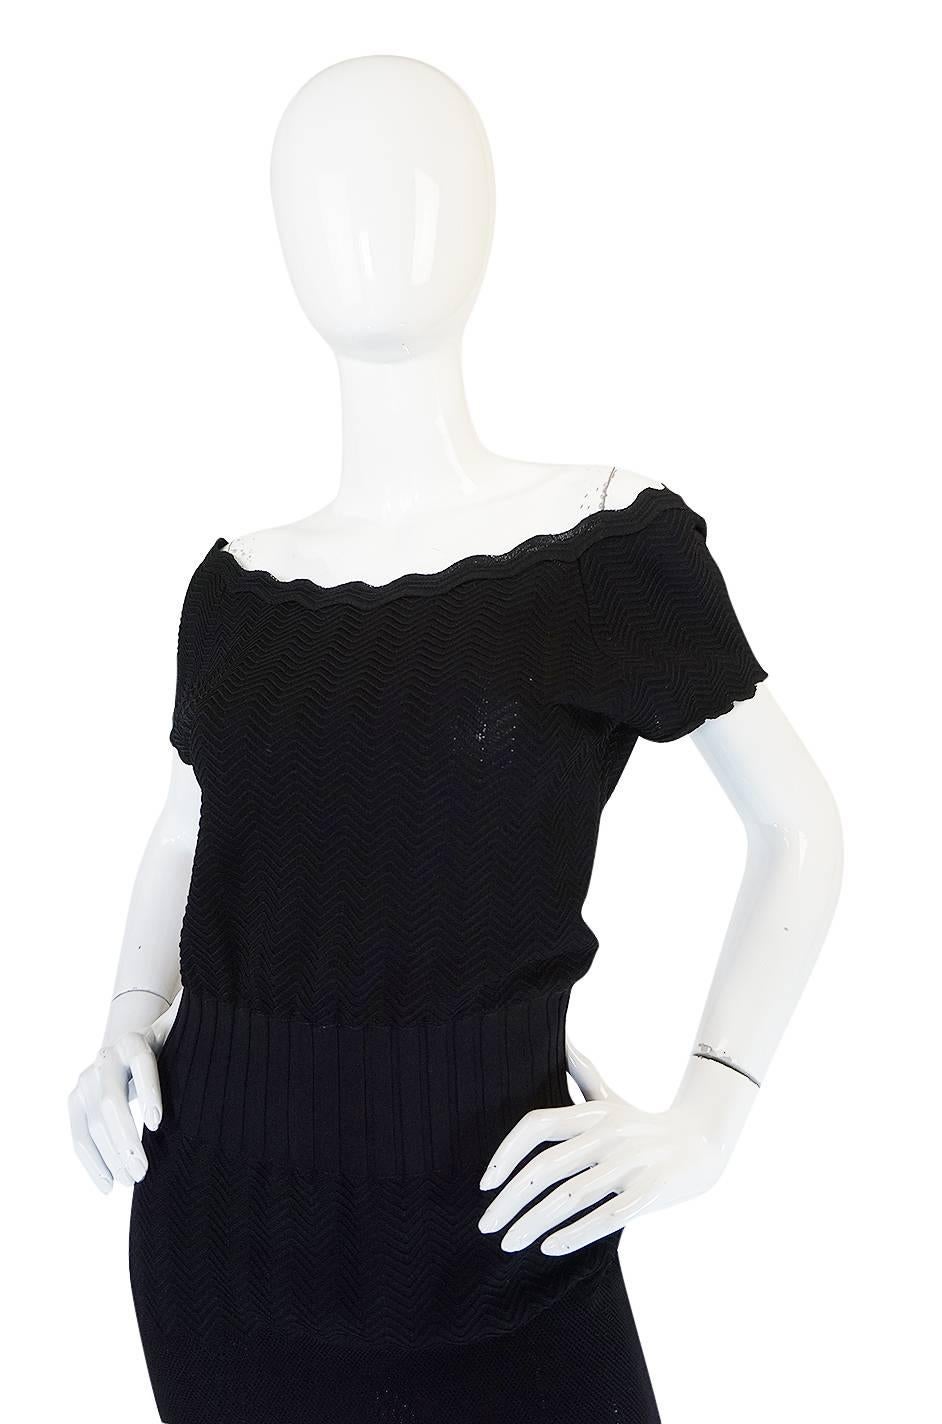 

This little black knit dress from the 2008A collection that Karl Lagerfeld designed for Chanel will quickly become one of your favorite pieces. It is the kind of dress that works on its own, layered under other pieces and can easily transition